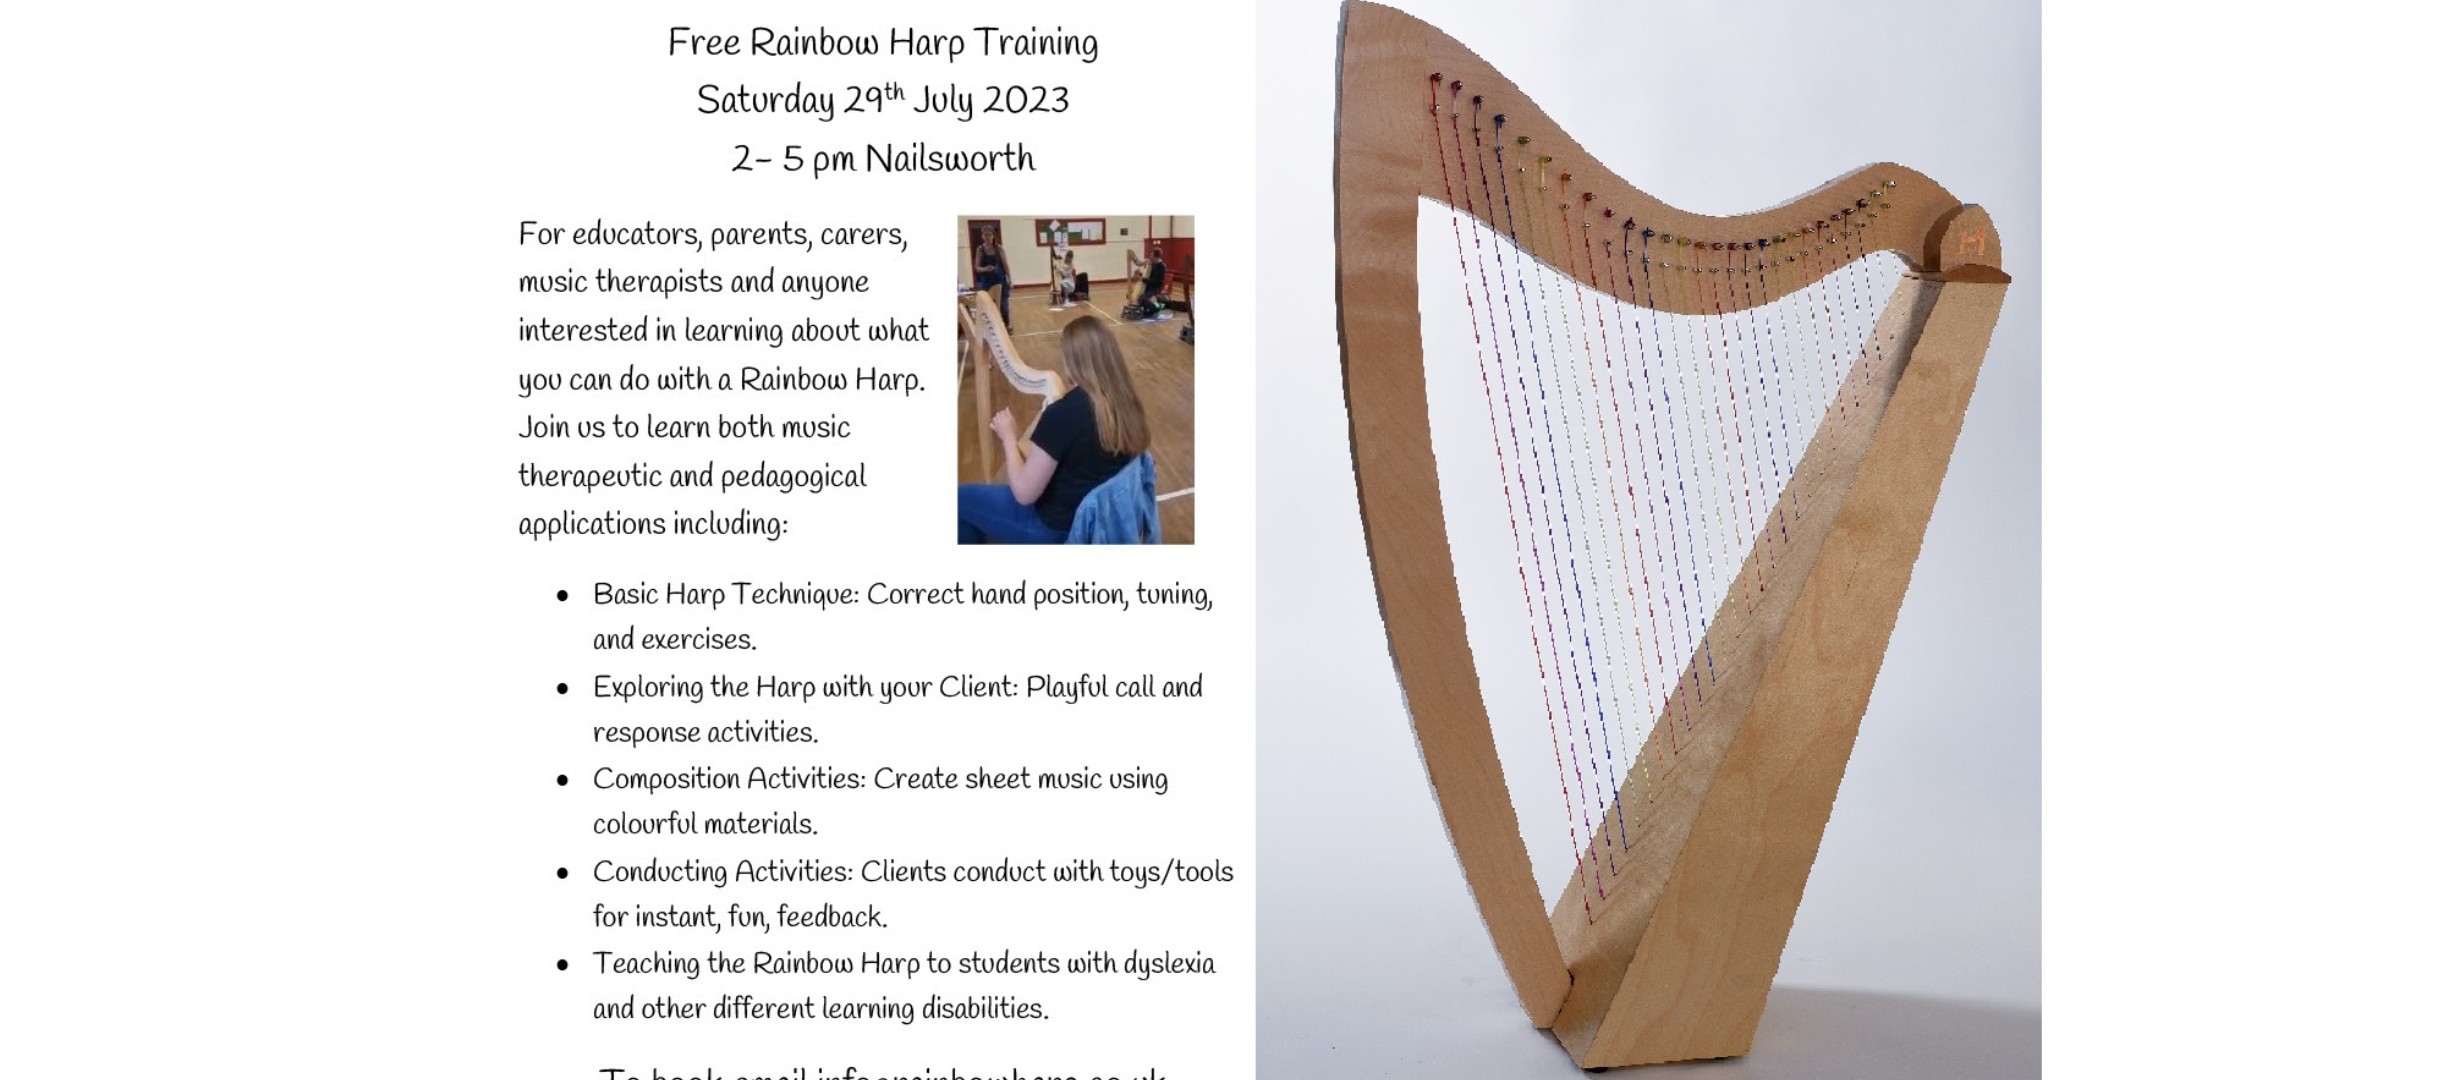 For educators, parents, carers, music therapists and anyone who wants to learn about the Rainbow Harp. Learn both music therapeutic and pedagogical applications including • Basic Harp Technique: Correct hand position, tuning, and exercises • Exploring the Harp with your Client: Playful call and response activities • Composition Activities: Create sheet music using colourful materials • Conducting: Clients conduct with toys/tools for instant feedback • Teaching Rainbow Harp to students with dyslexia